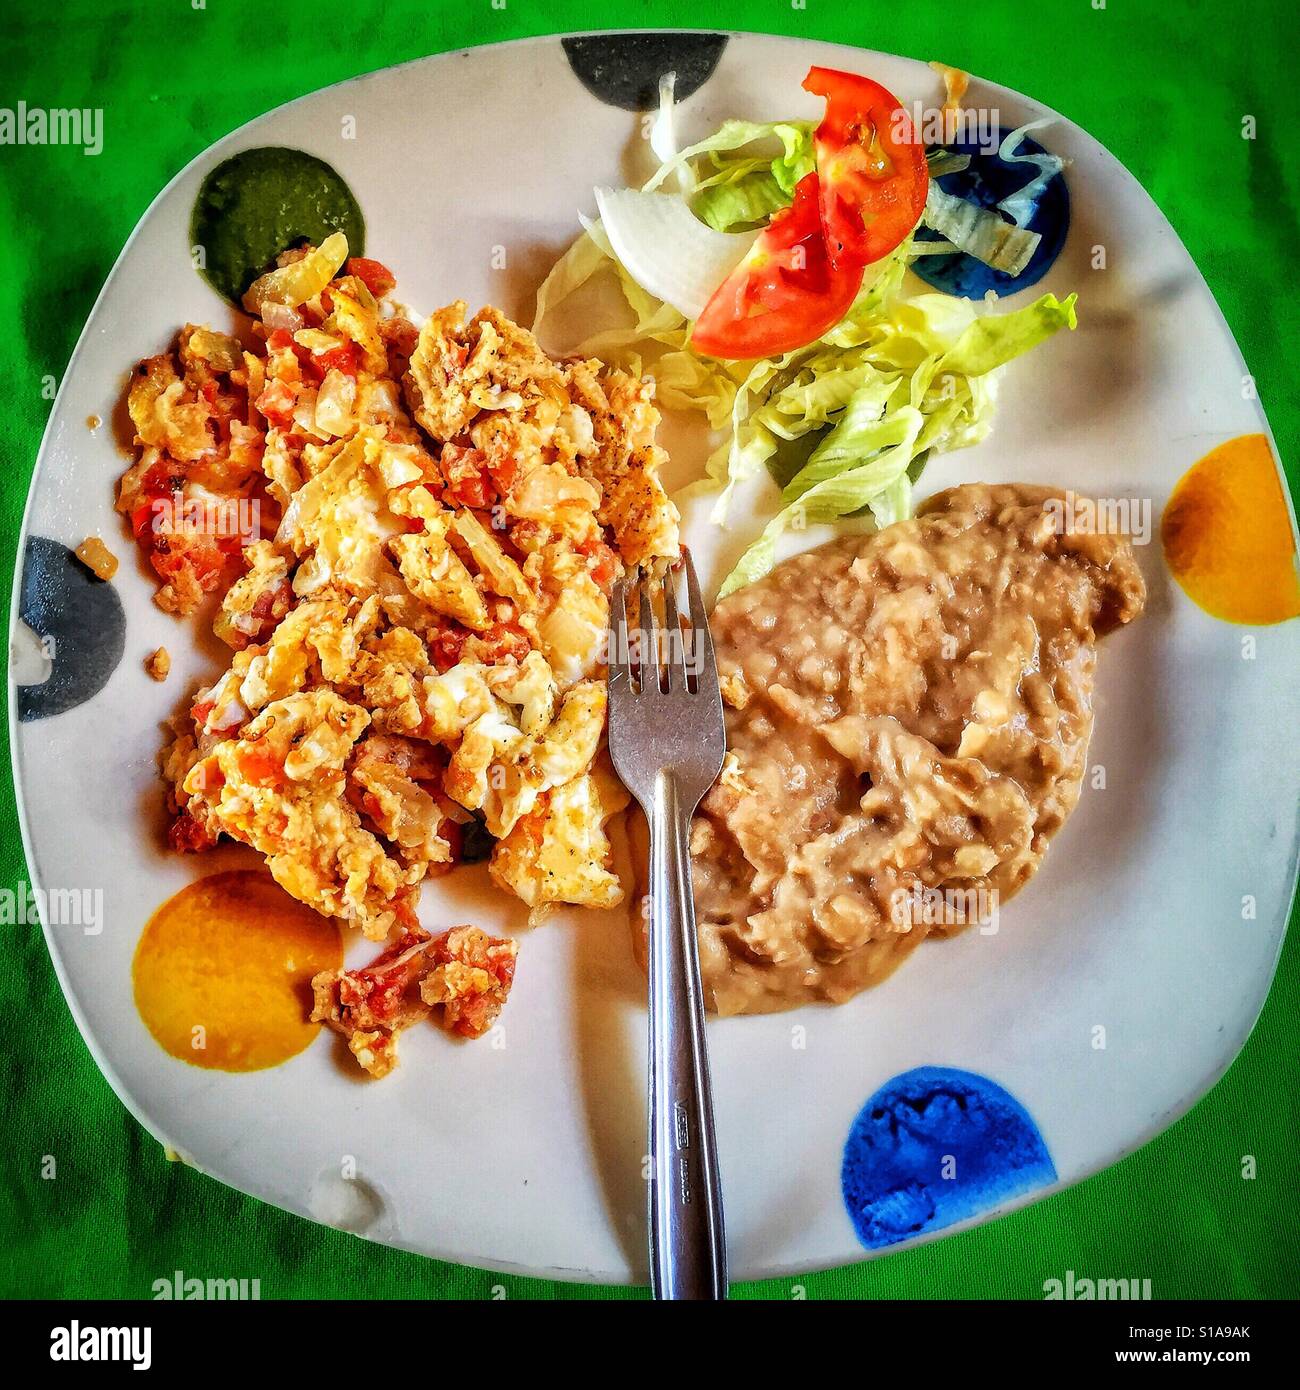 A colorful plate painted with giant polka dots is filled with a traditional Mexican breakfast of Huevos Mexicanos, refried beans, and a salad garnish. Stock Photo